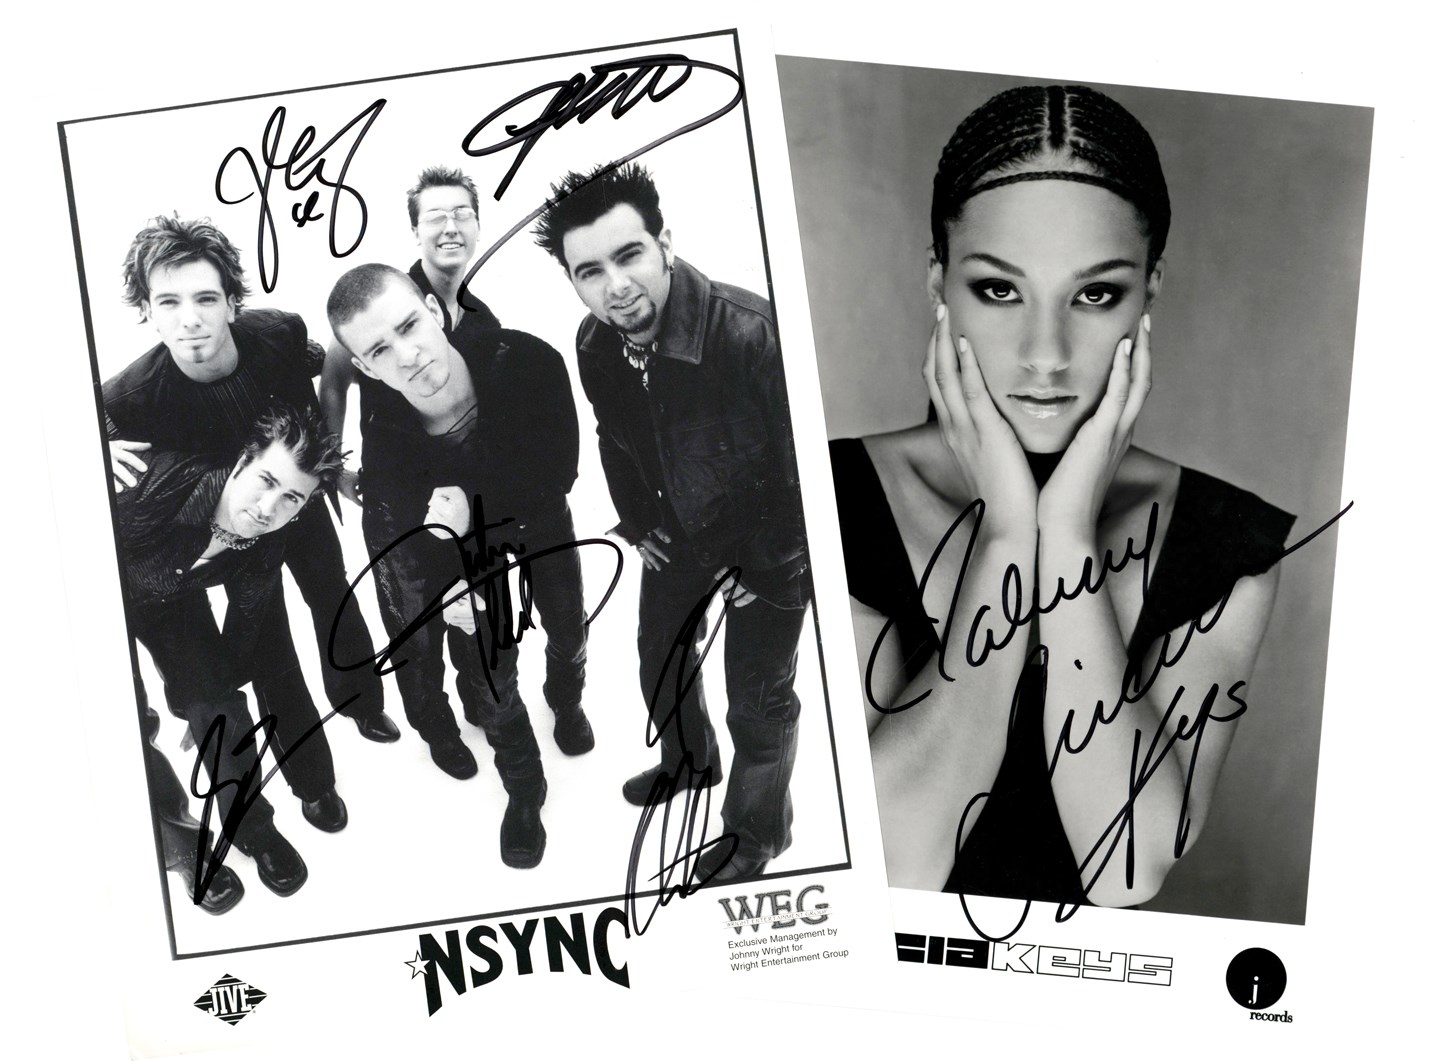 Rock And Pop Culture - Alicia Keys and NSYNC Signed 8x10s (PSA)